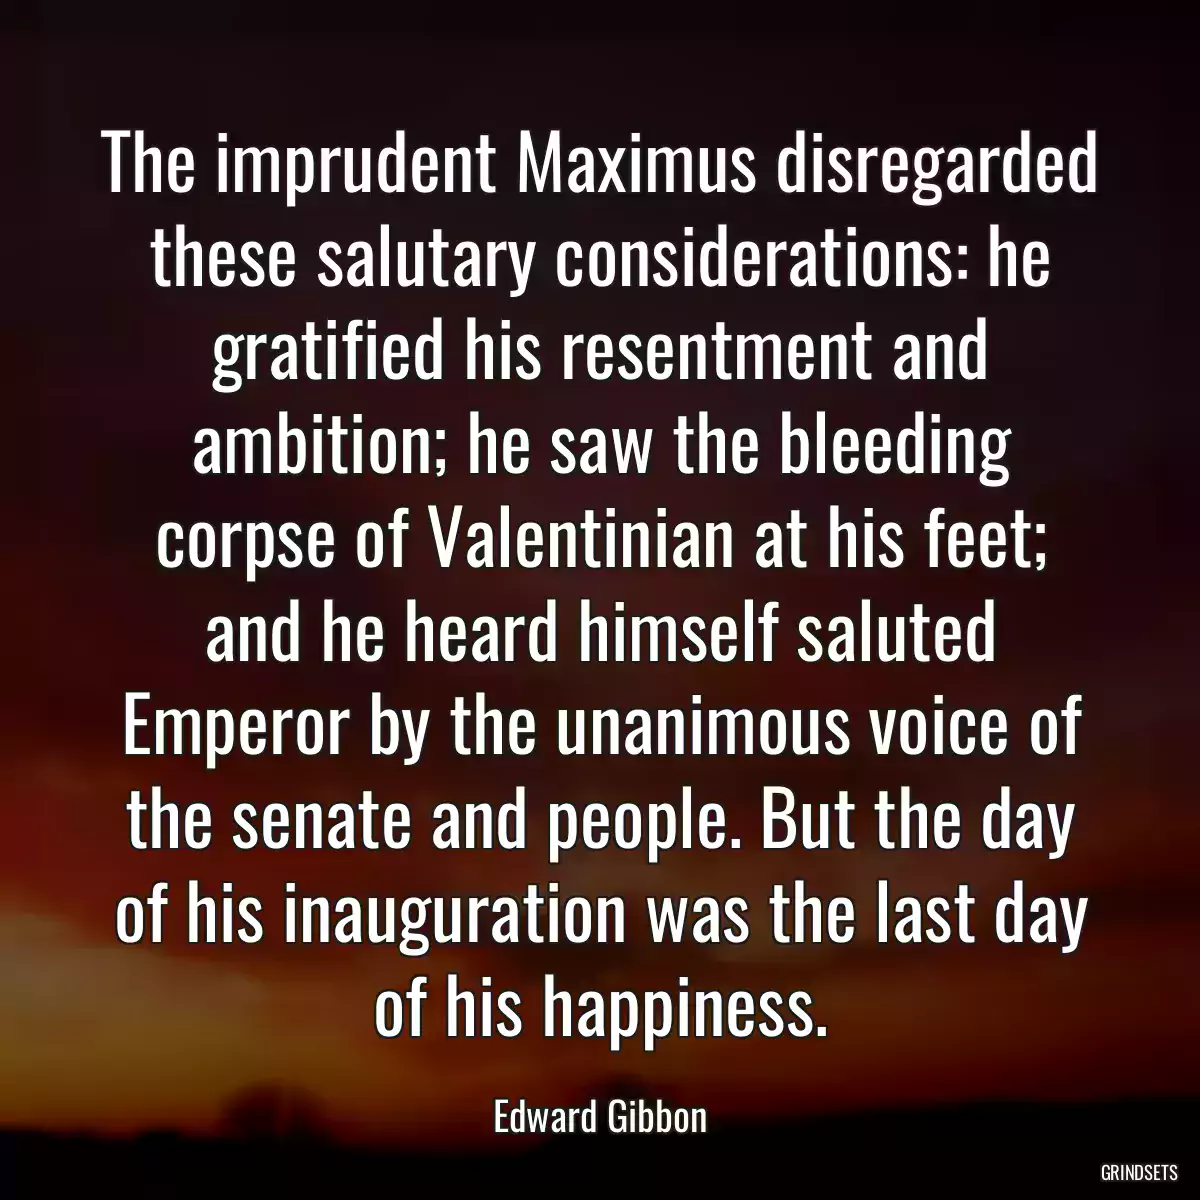 The imprudent Maximus disregarded these salutary considerations: he gratified his resentment and ambition; he saw the bleeding corpse of Valentinian at his feet; and he heard himself saluted Emperor by the unanimous voice of the senate and people. But the day of his inauguration was the last day of his happiness.